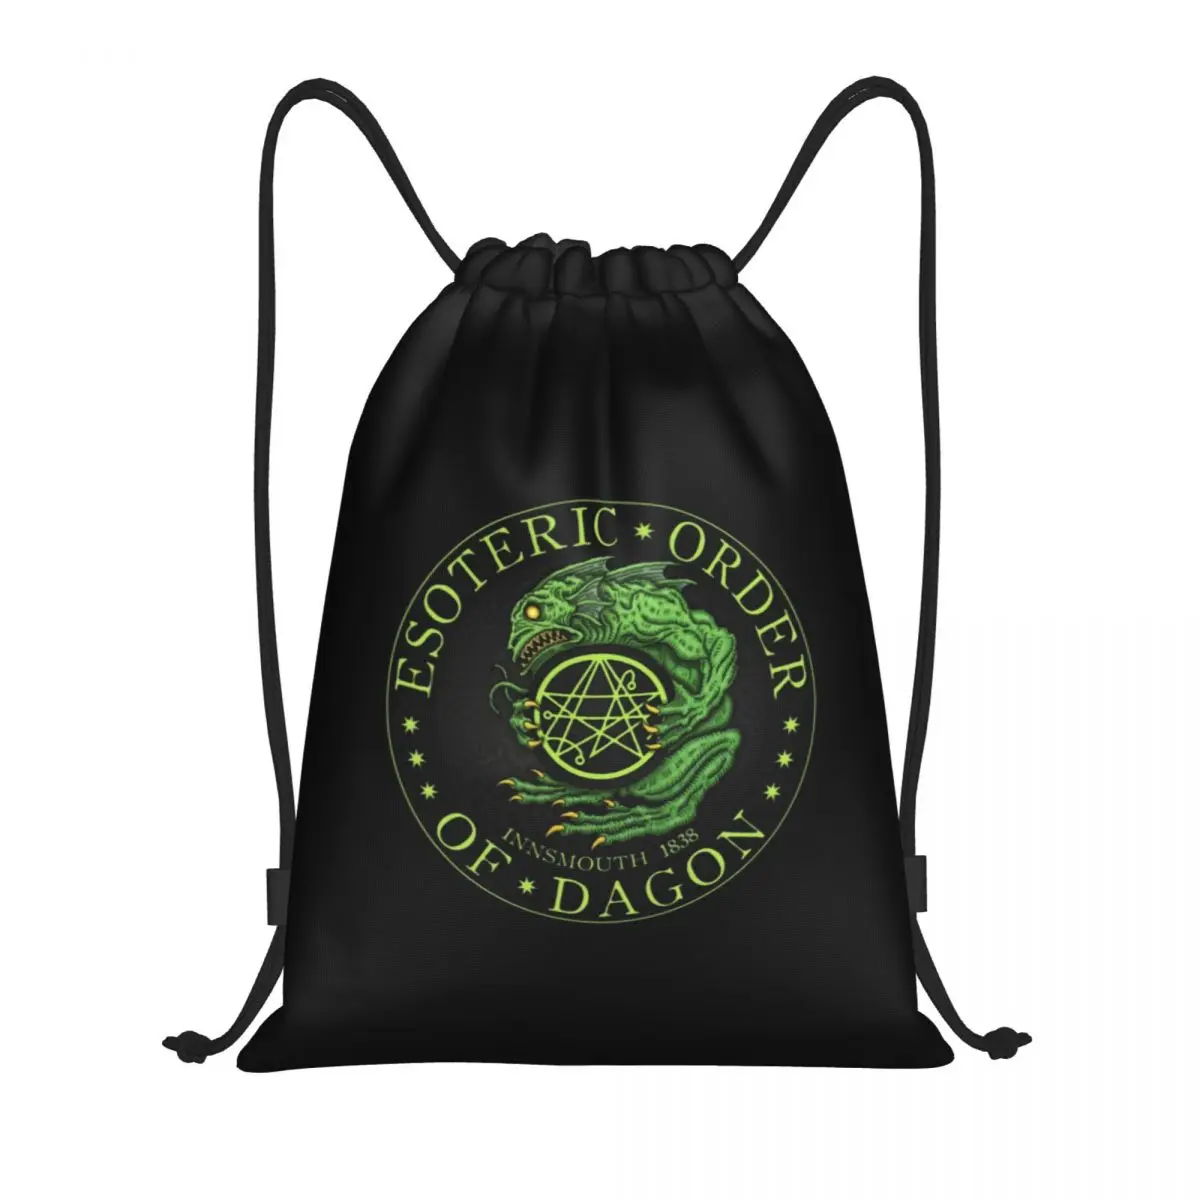 

The Call Of Cthulhu Drawstring Backpack Bags Women Lightweight Lovecraft Mythos Monster Gym Sports Sackpack Sacks for Traveling